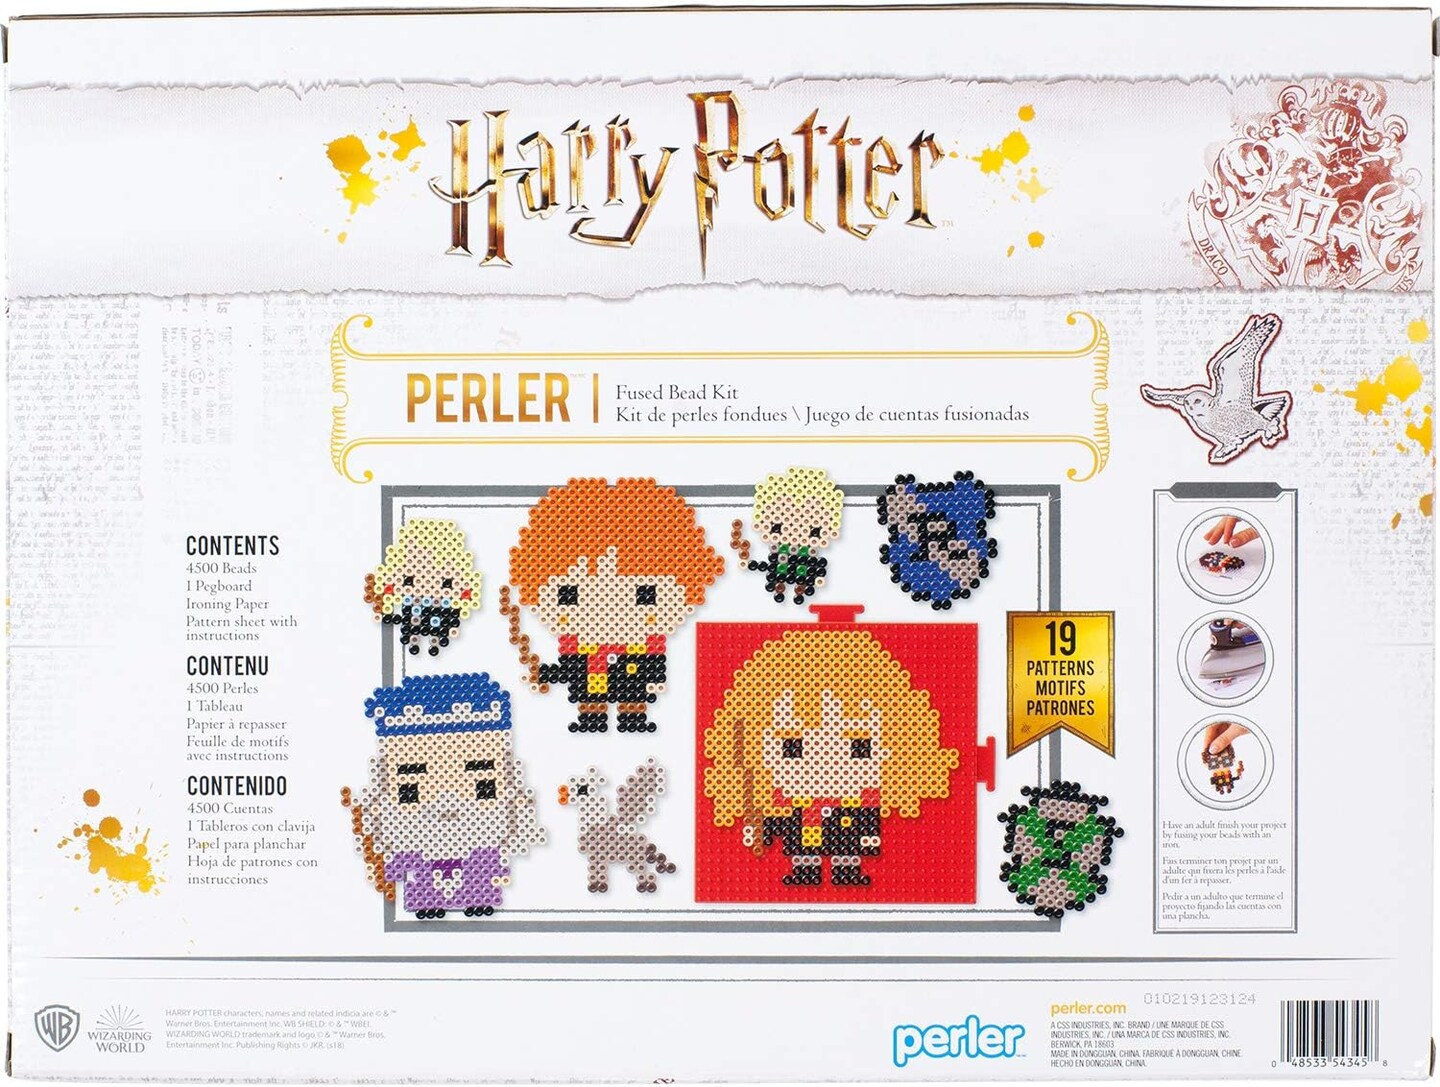 Perler 80-54345 Harry Potter Fuse Bead Kit for Kids and Adults, Comes with 19 Patterns, Multicolor, 4503pcs